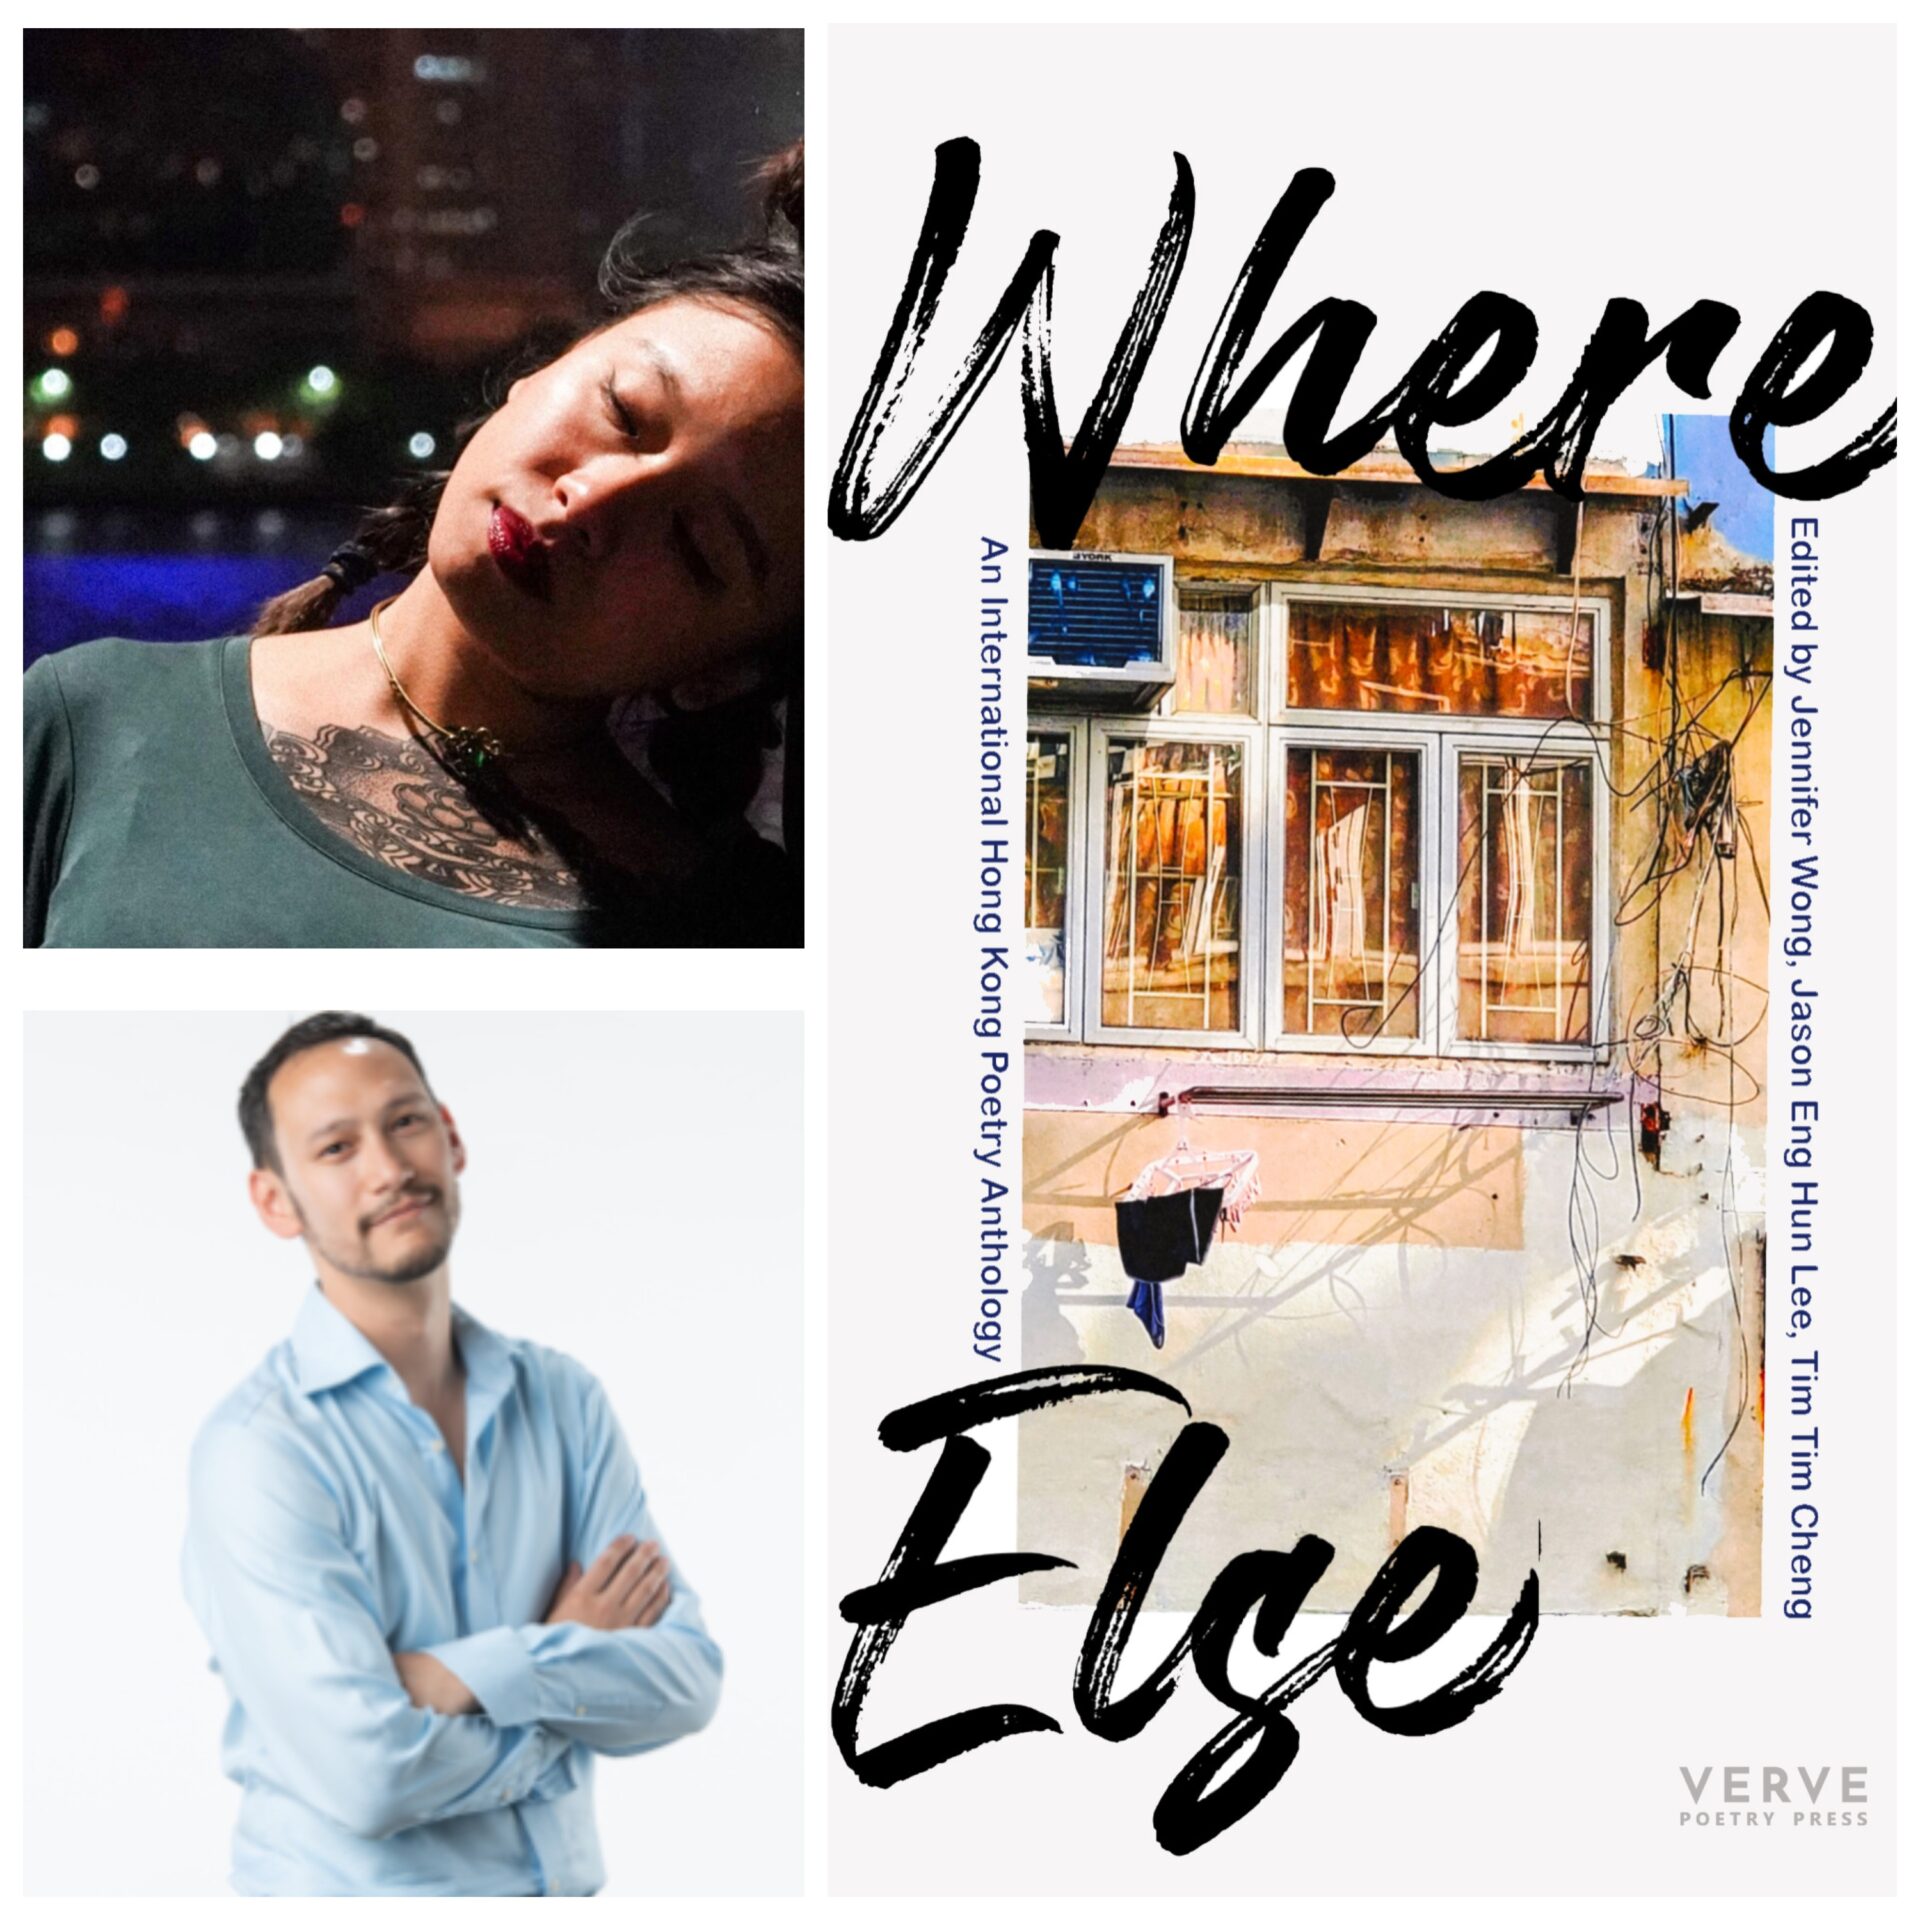 Where Else: An International Hong Kong Poetry Anthology: Editors Interview